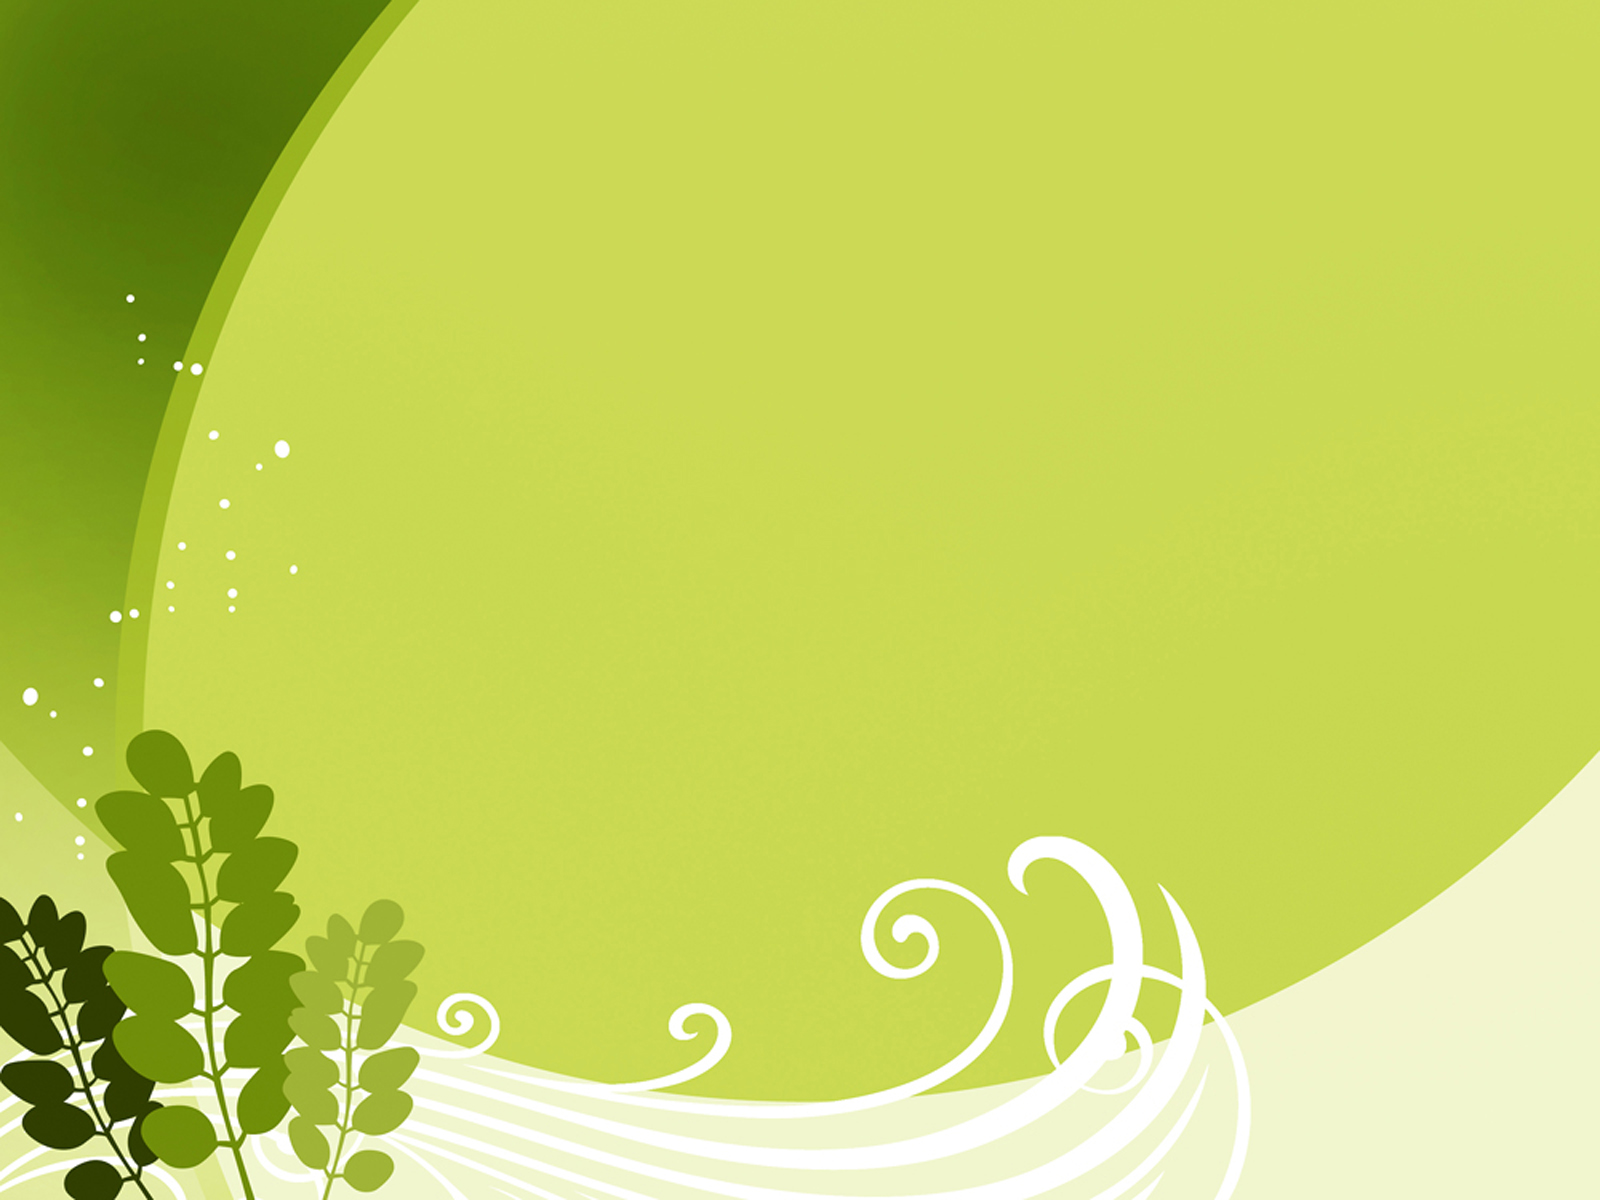 powerpoint wallpaper background,green,yellow,leaf,circle,illustration